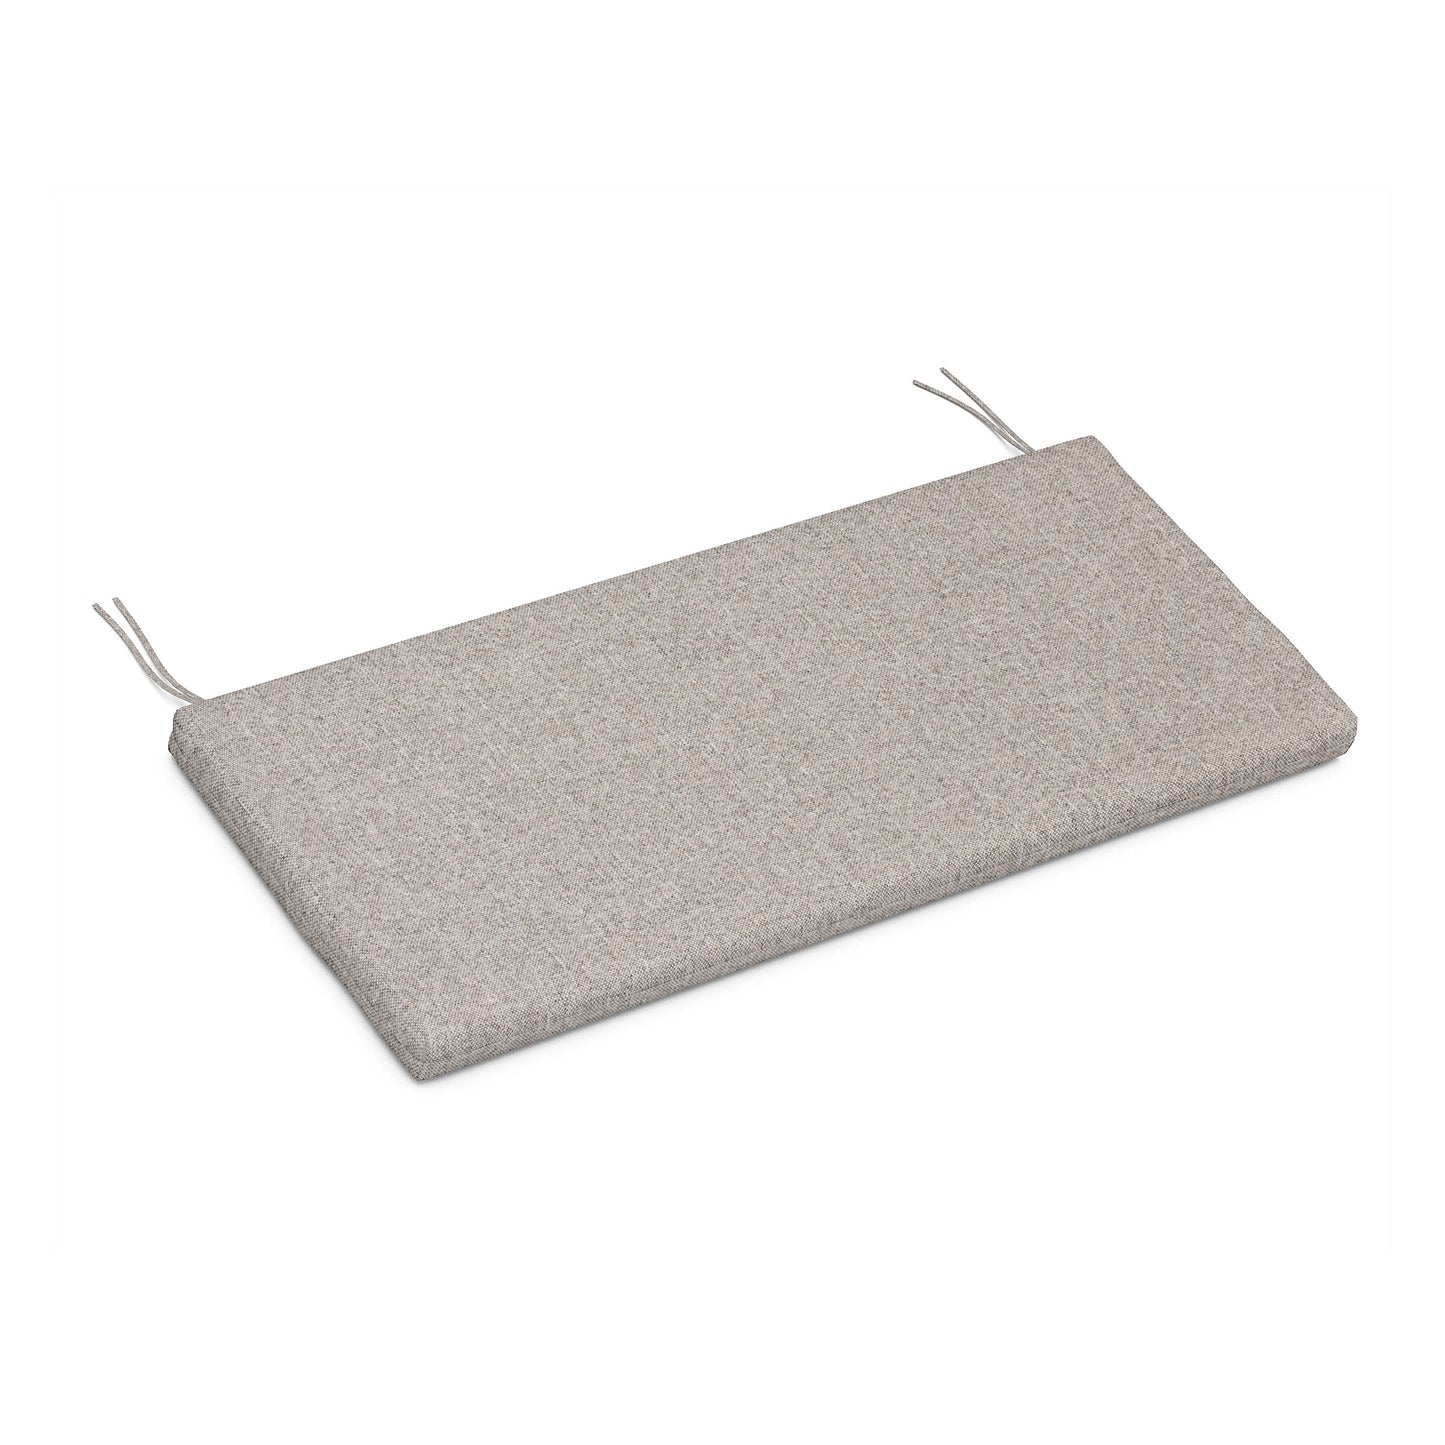 A rectangular POLYWOOD XPWS0060 seat cushion in a light gray, weather-resistant upholstery fabric with ties at each end, photographed on a plain white background.